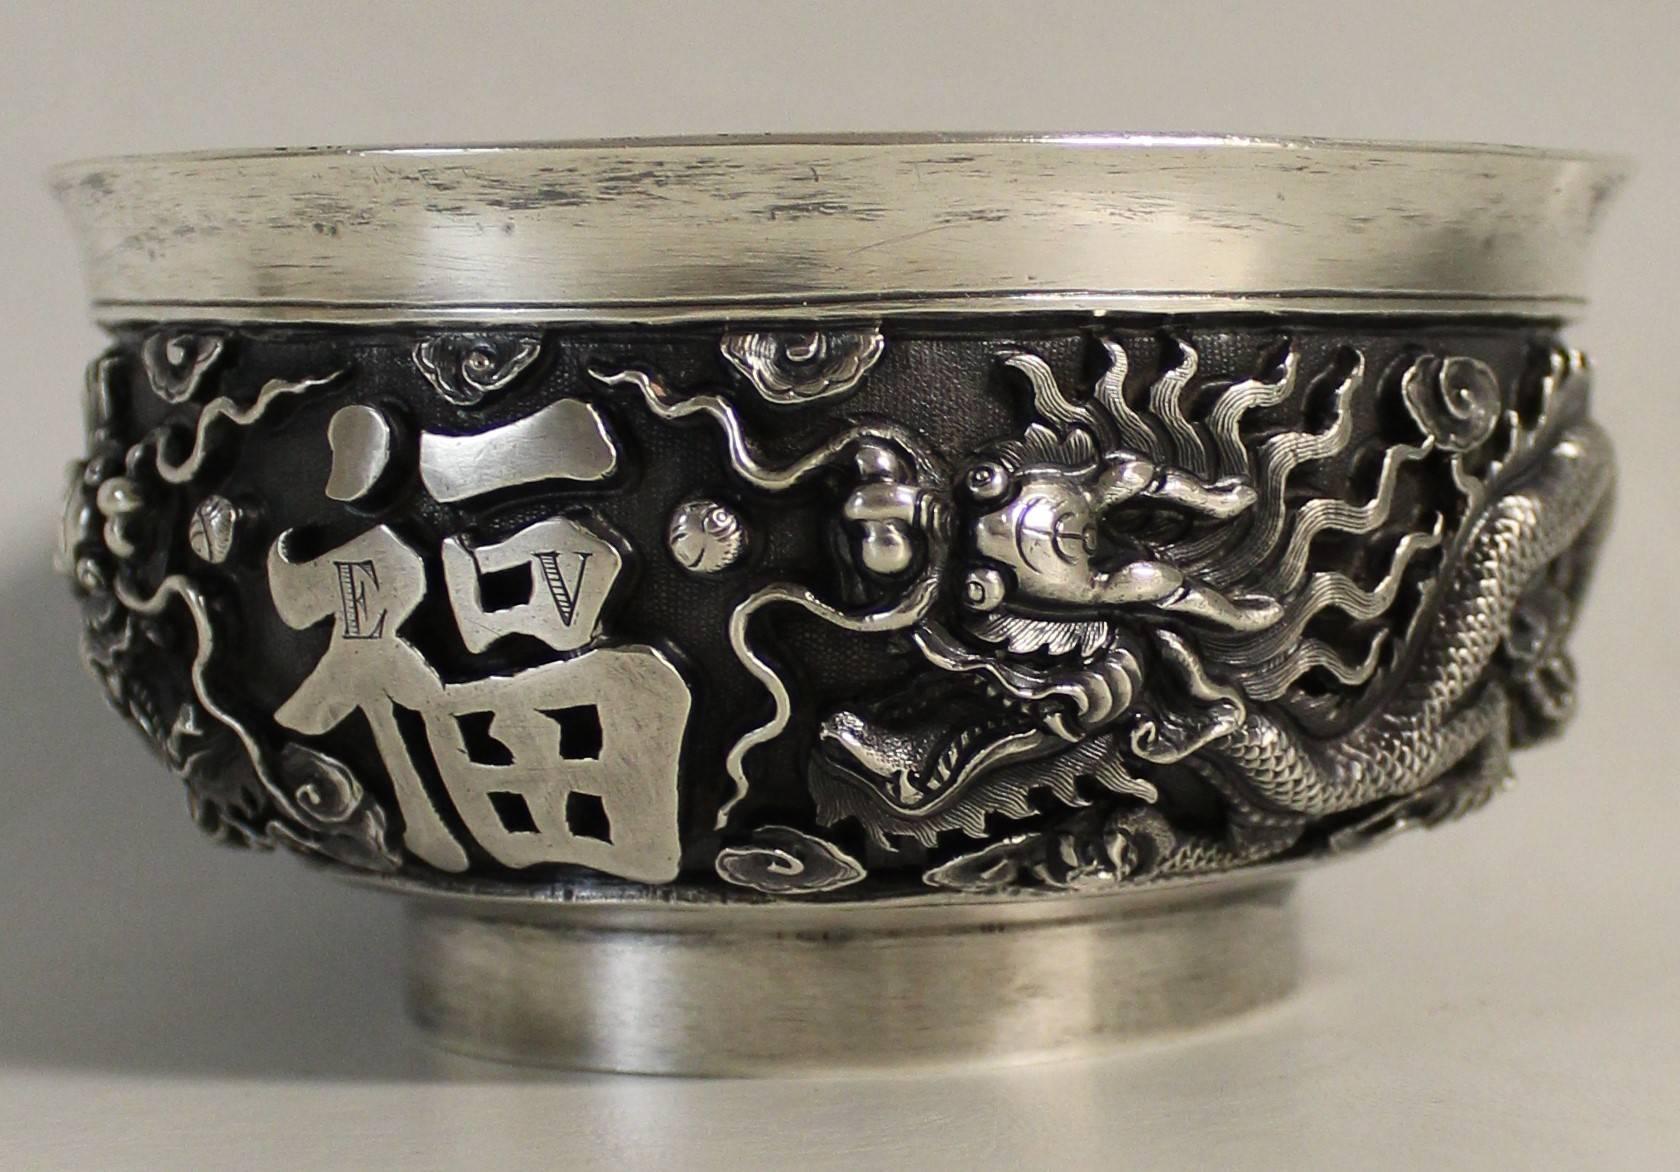 19th Century Chinese Export Silver Bowl, Plate & Seal Attributed to Tu Mao Xing 3